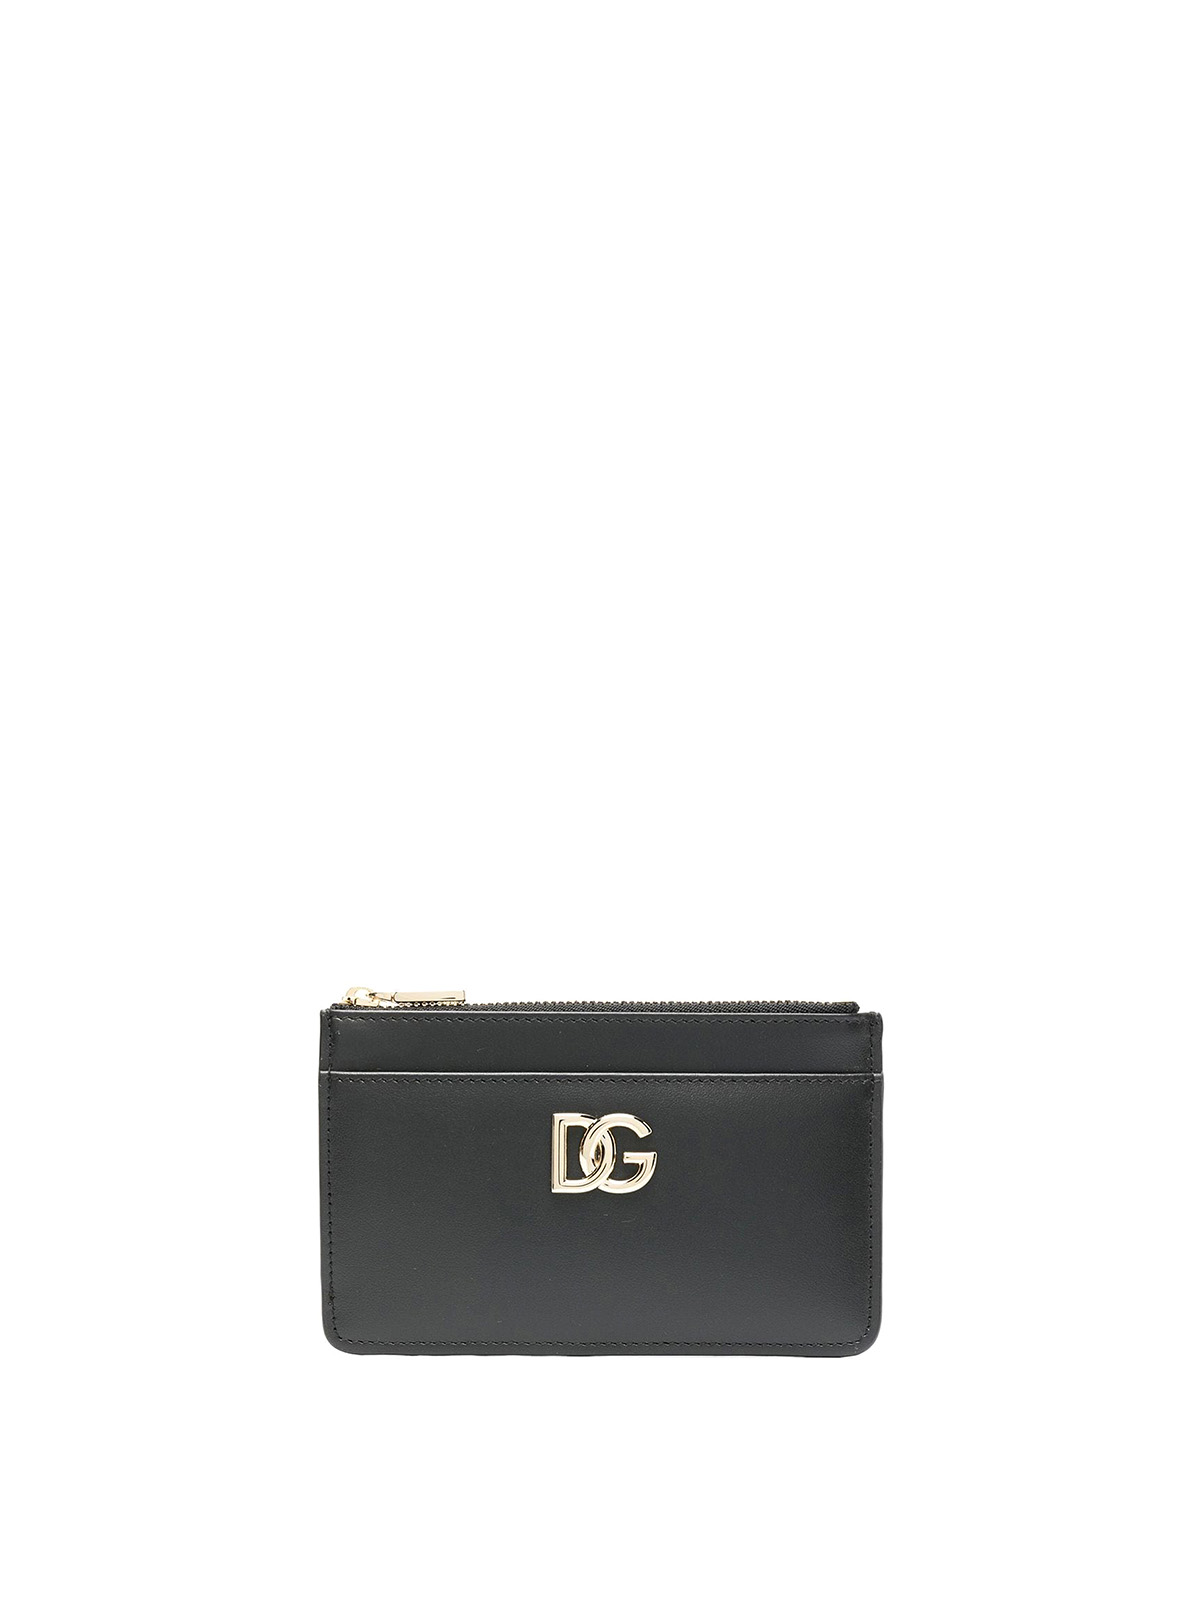 Dolce & Gabbana Leather Credit Card Holder In Negro